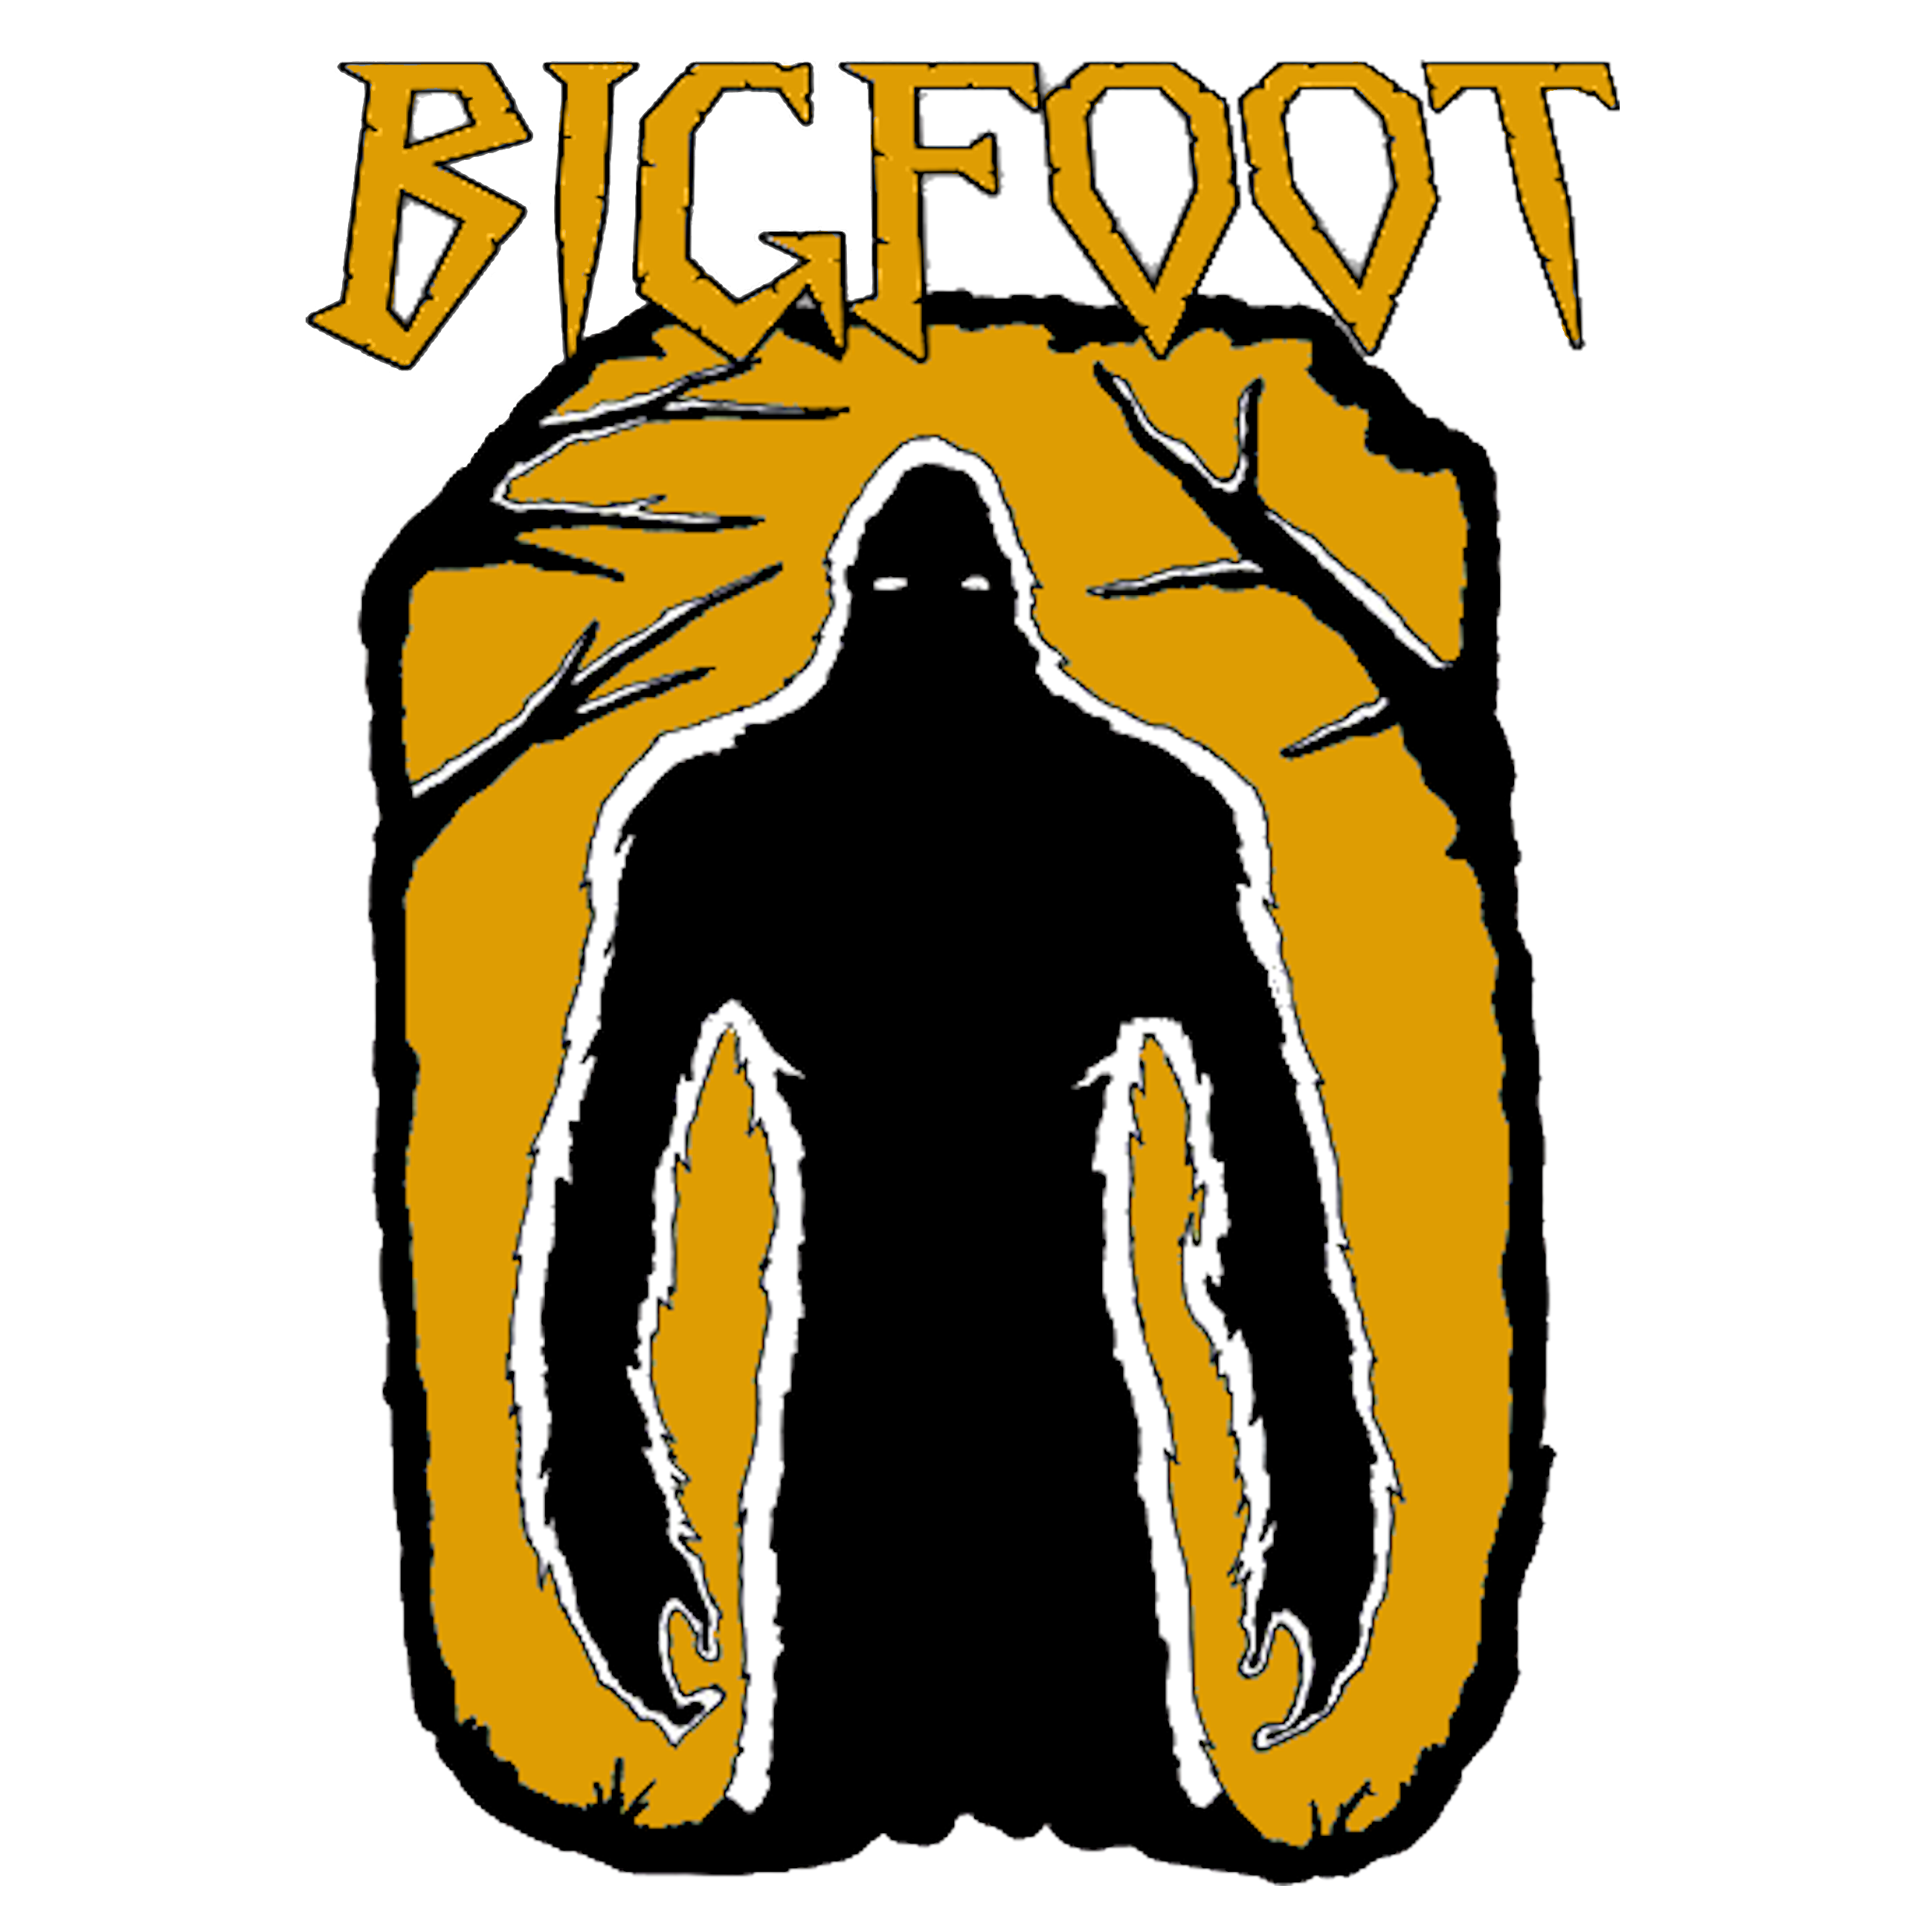 Footprint clipart coloring page. Bigfoot cut free images